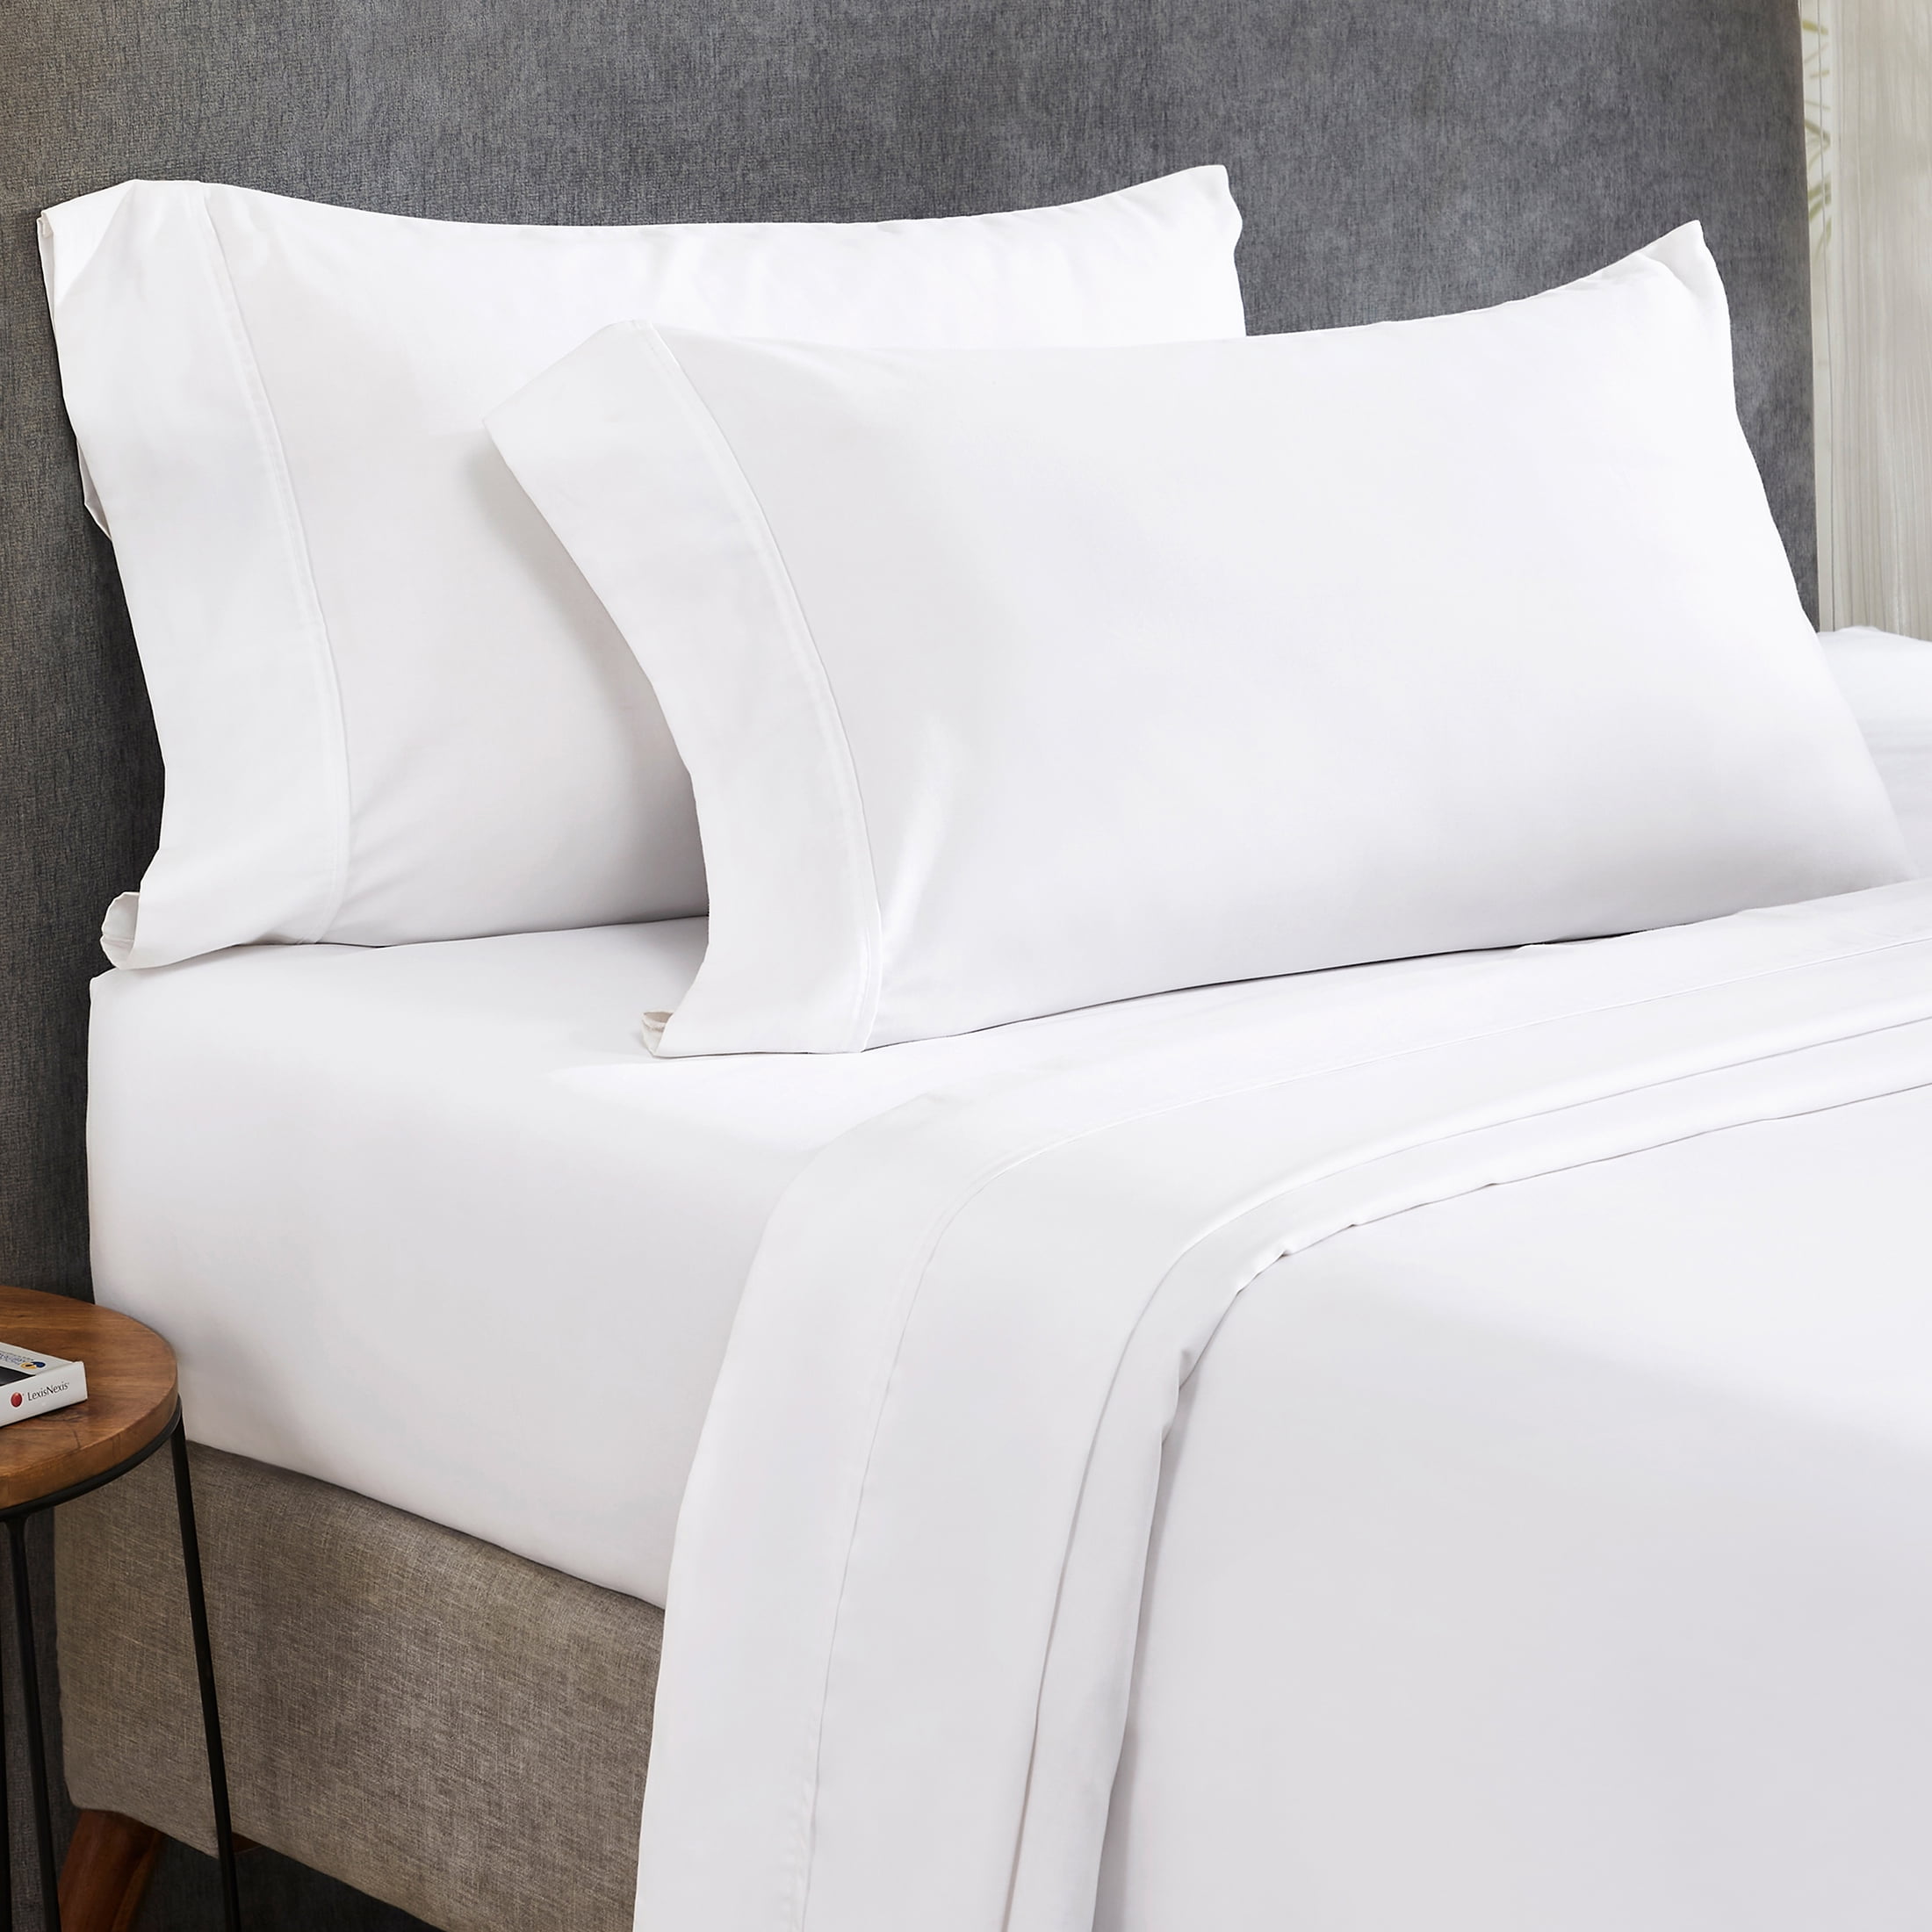 Details about   Pure Egyptian Cotton Sheets King-Size 800 Thread Count Dark Grey Bedding Hote 